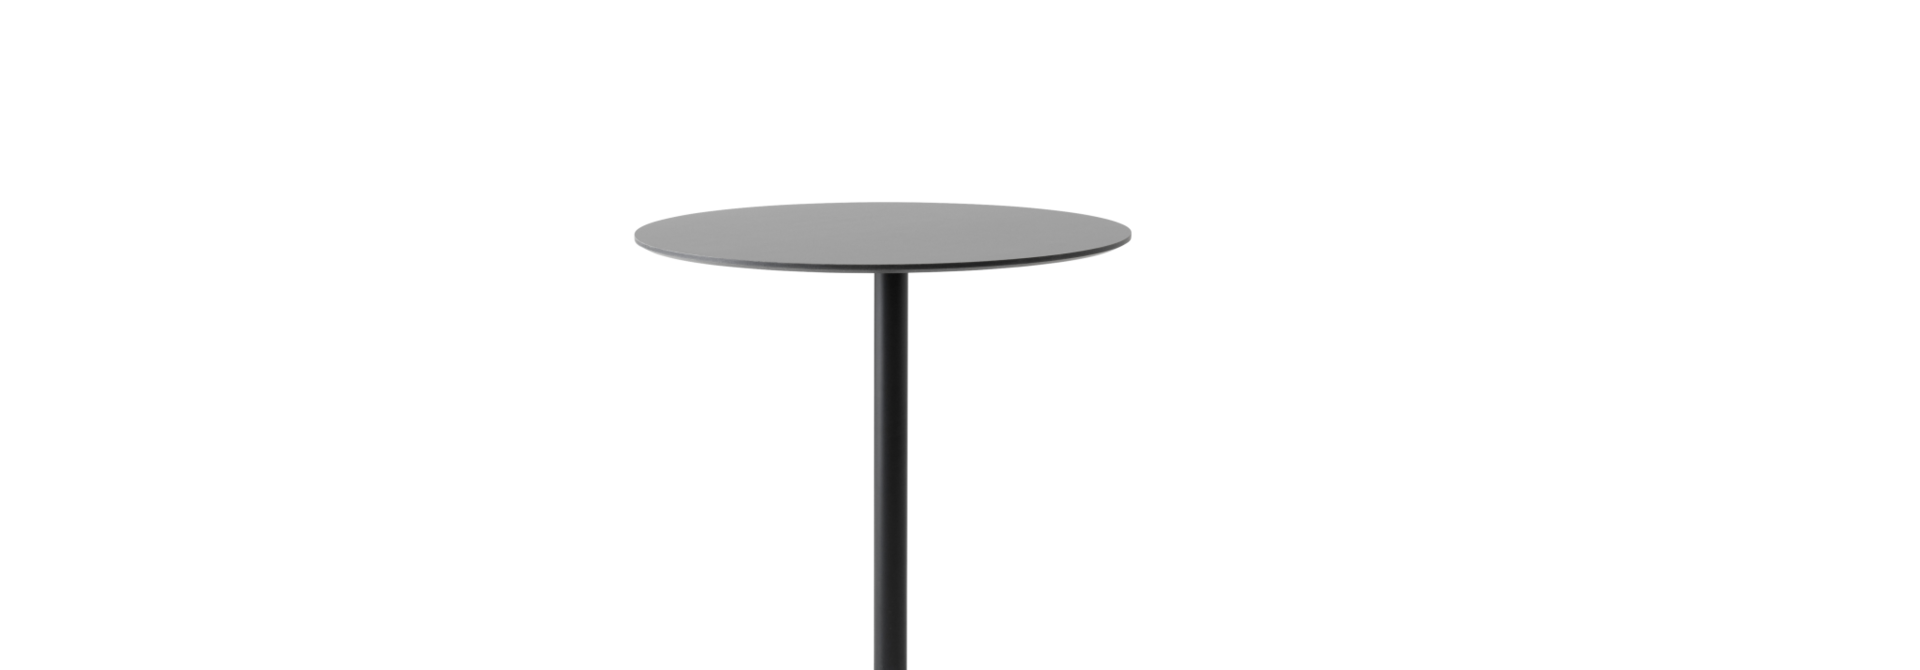 Rely Outdoor Table ATD5 - dia65cm